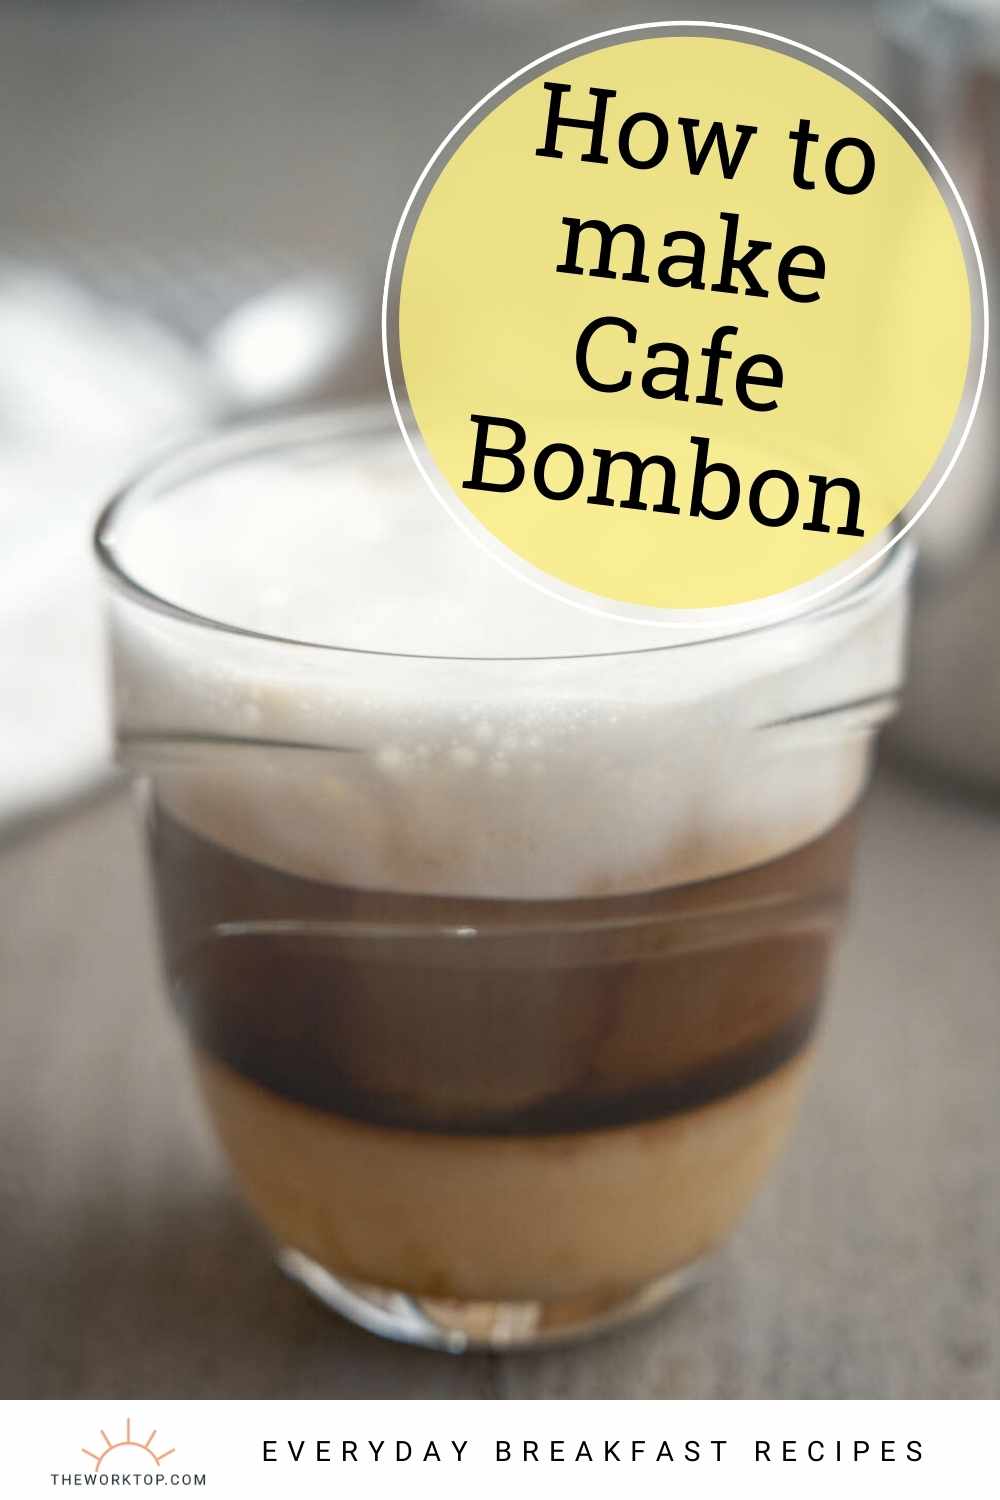 How to make cafe bombon with text overlay